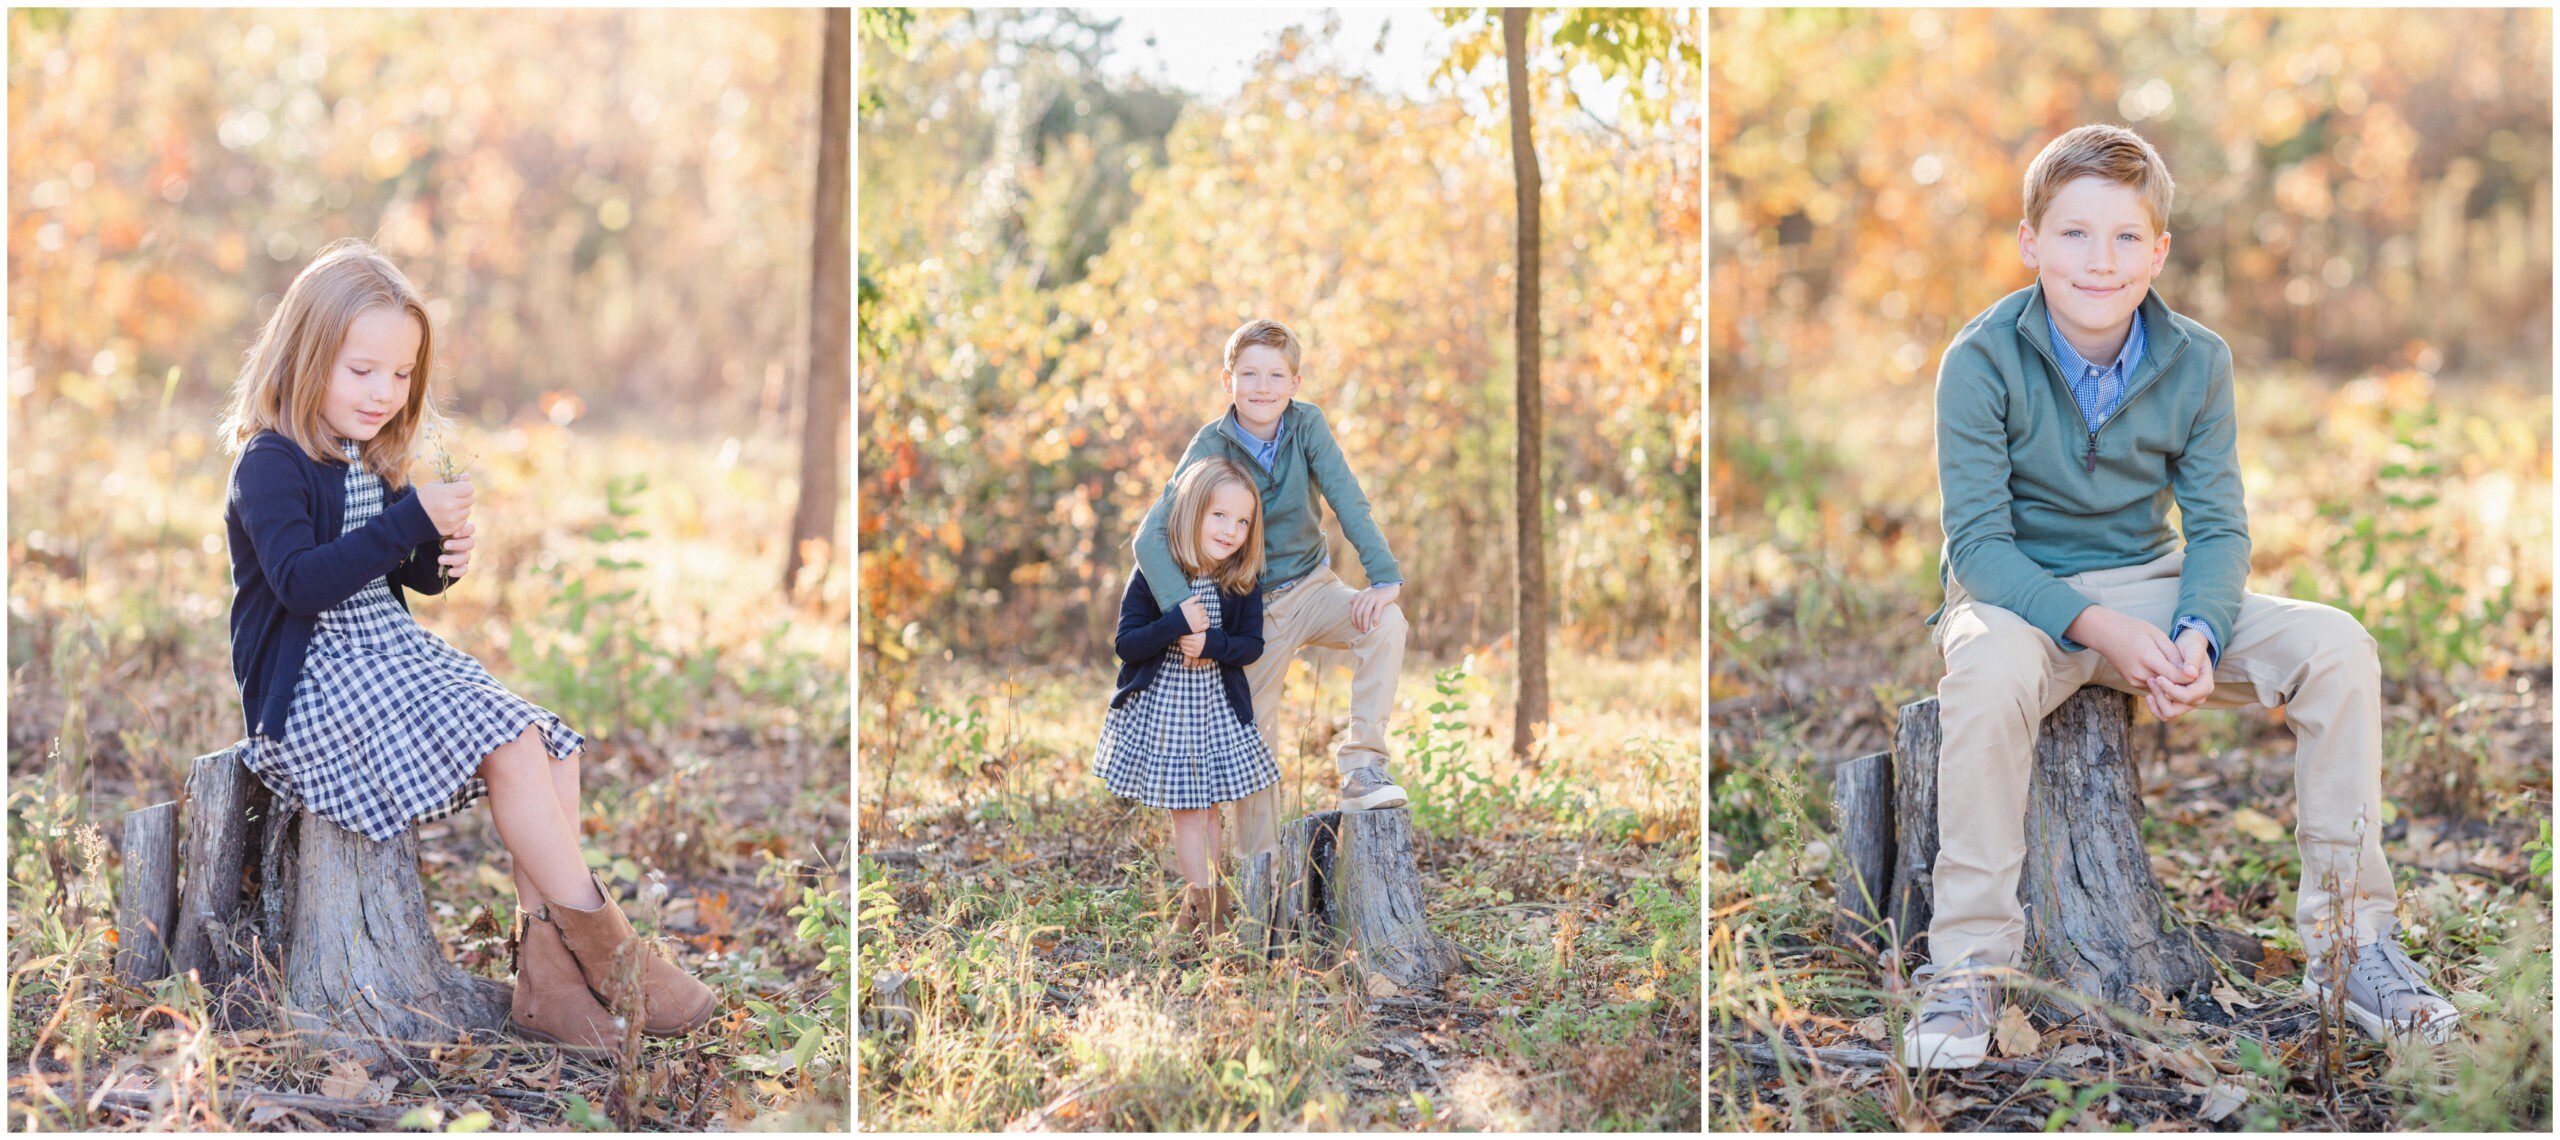 Autumn family pictures in Frontenac, MO